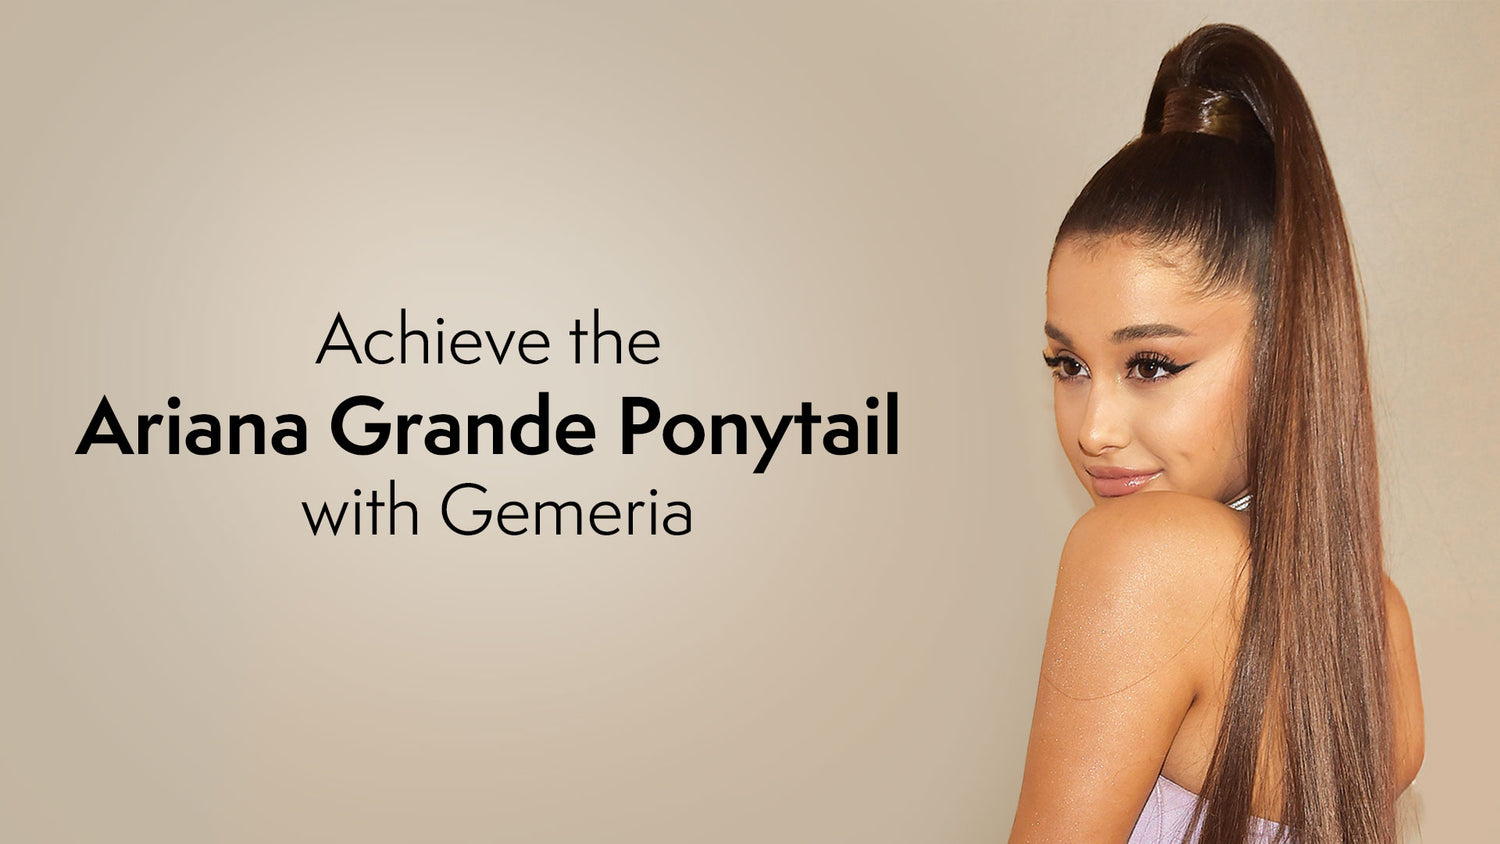 How to achieve the Ariana Grande Ponytail with Gemeria?